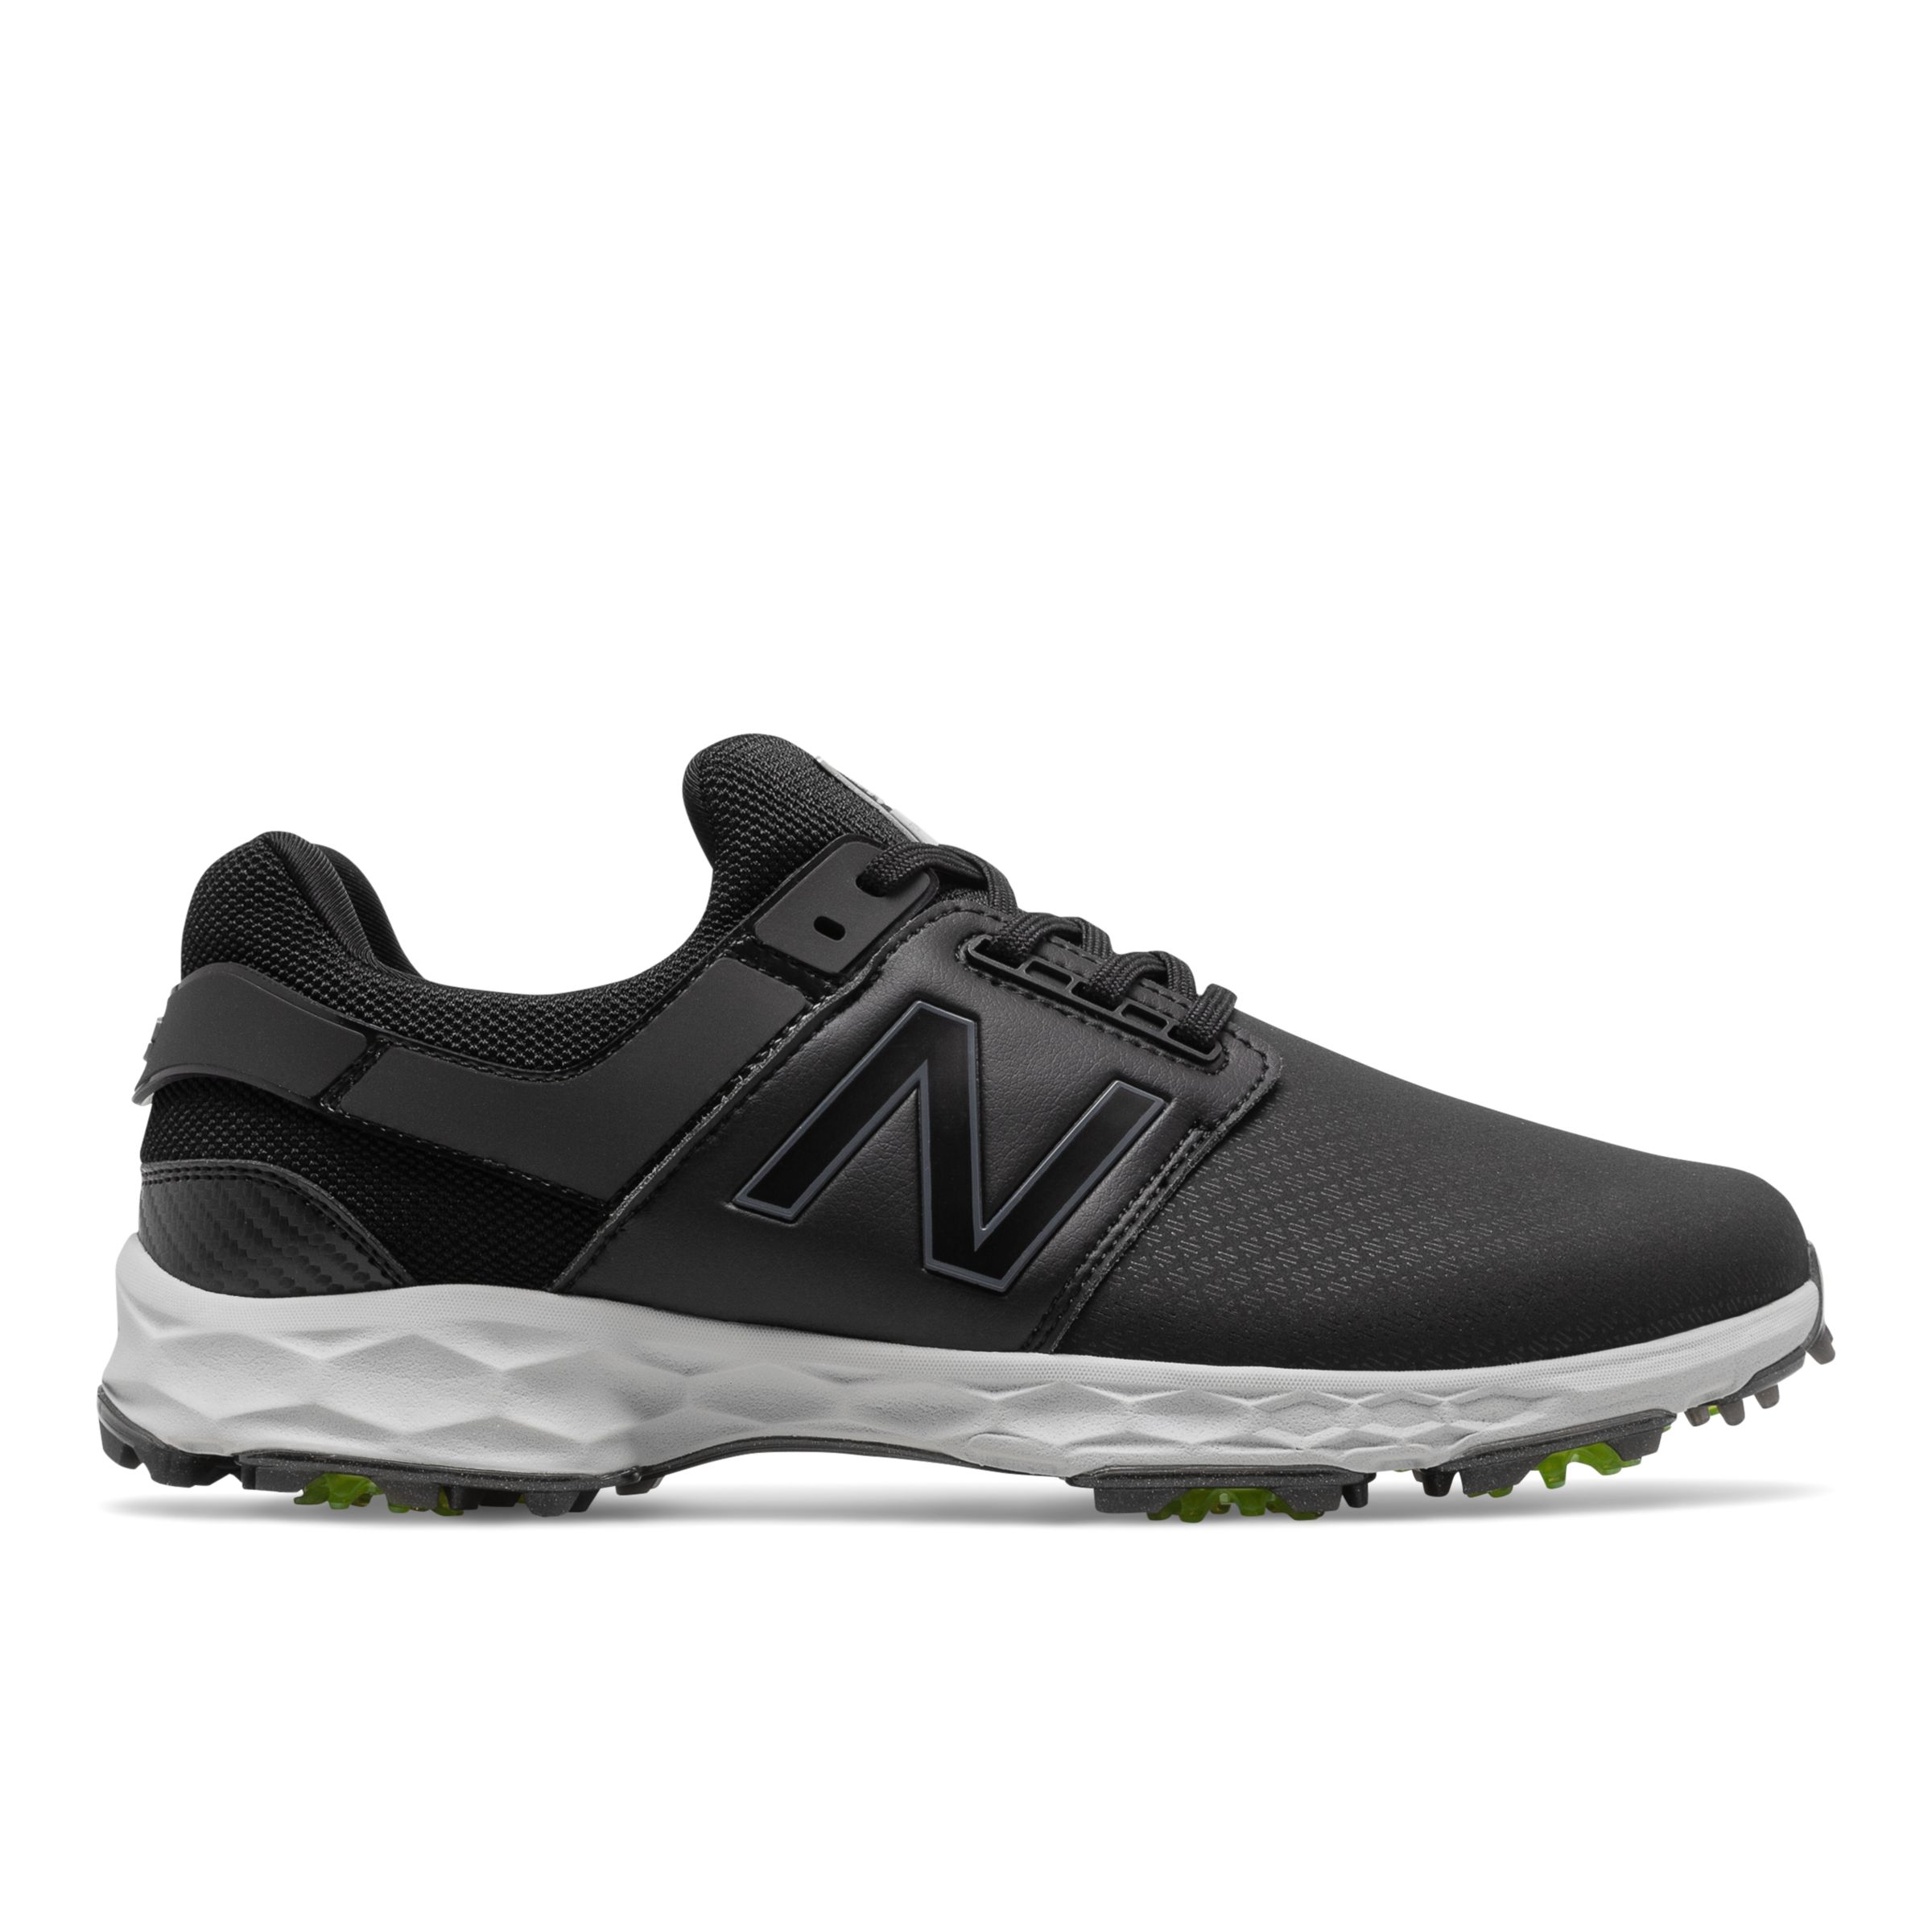 new balance fuelcell tc